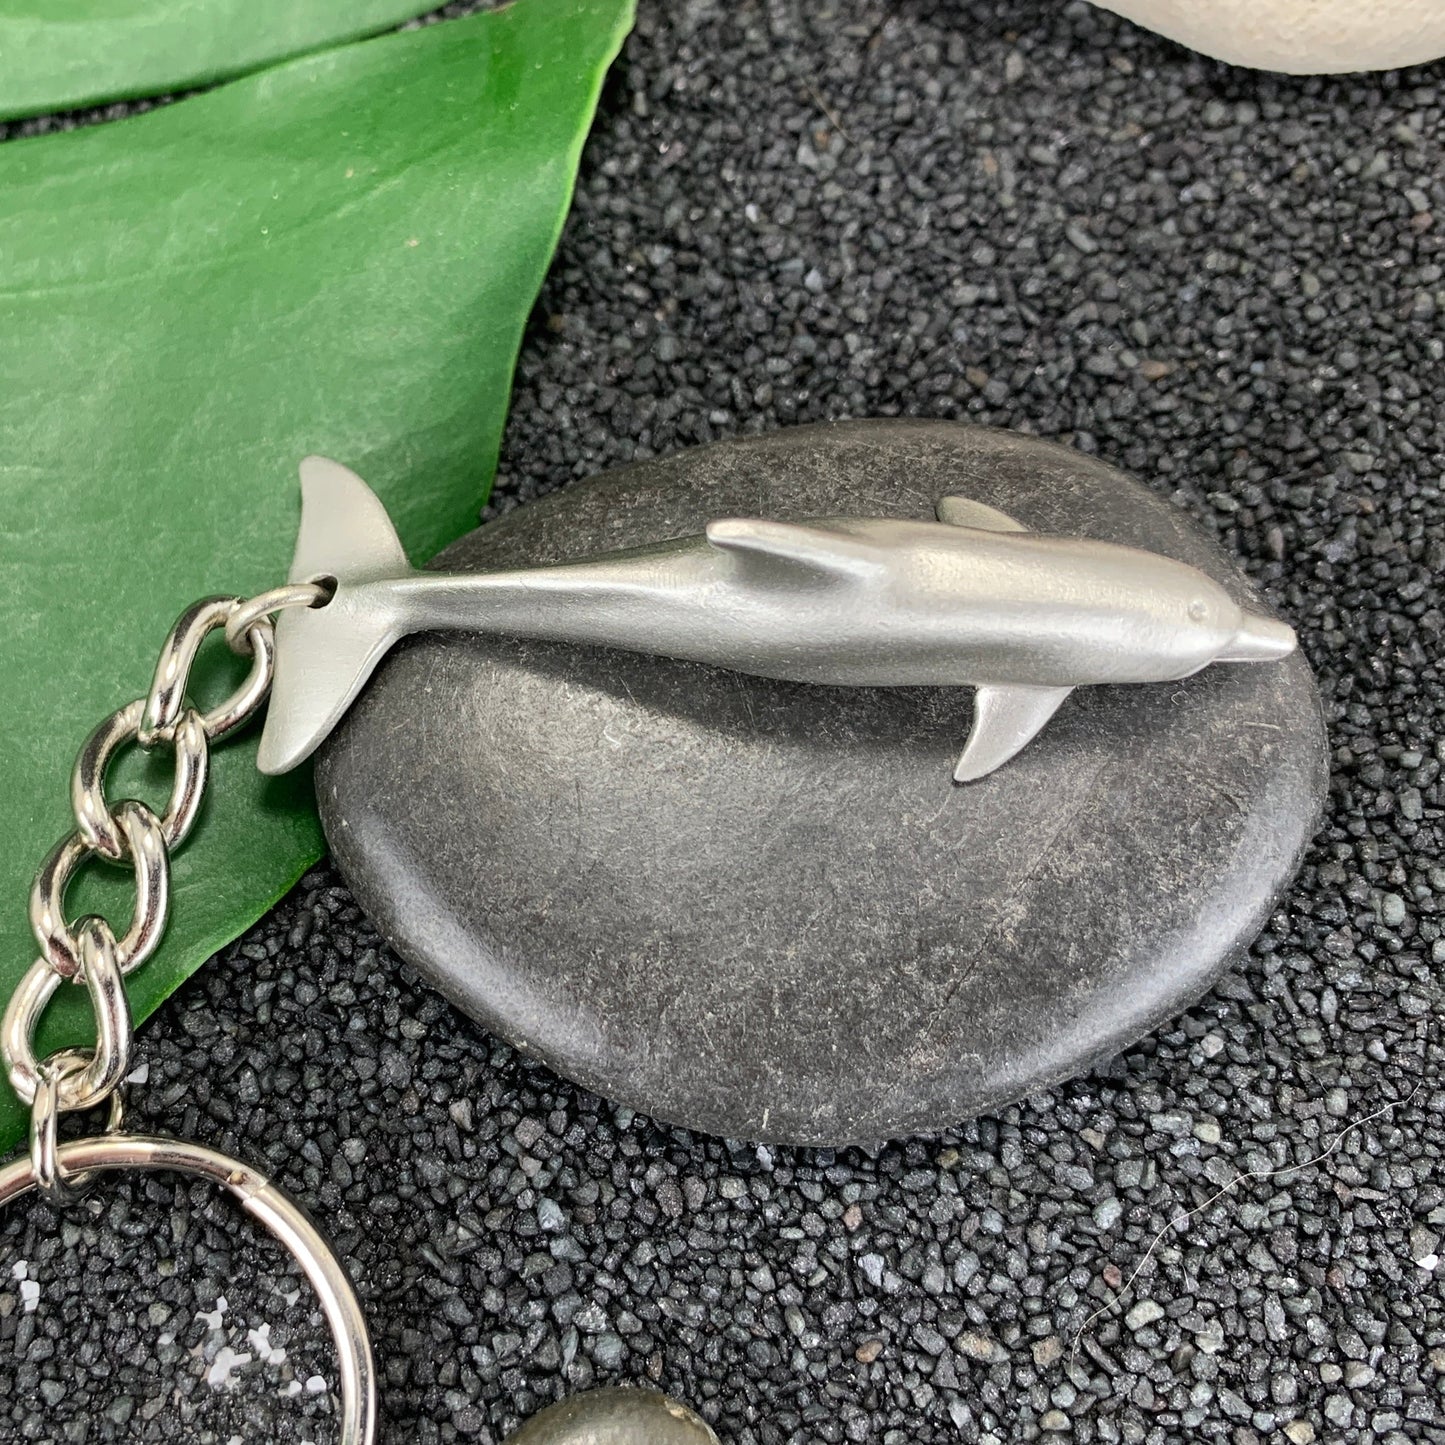 Dolphin Keychain for Women and Men- Dolphin Gifts for Women, Dolphin Key Ring, Gifts for Dolphin Lovers, Sea Life Key Chain - The Tool Store